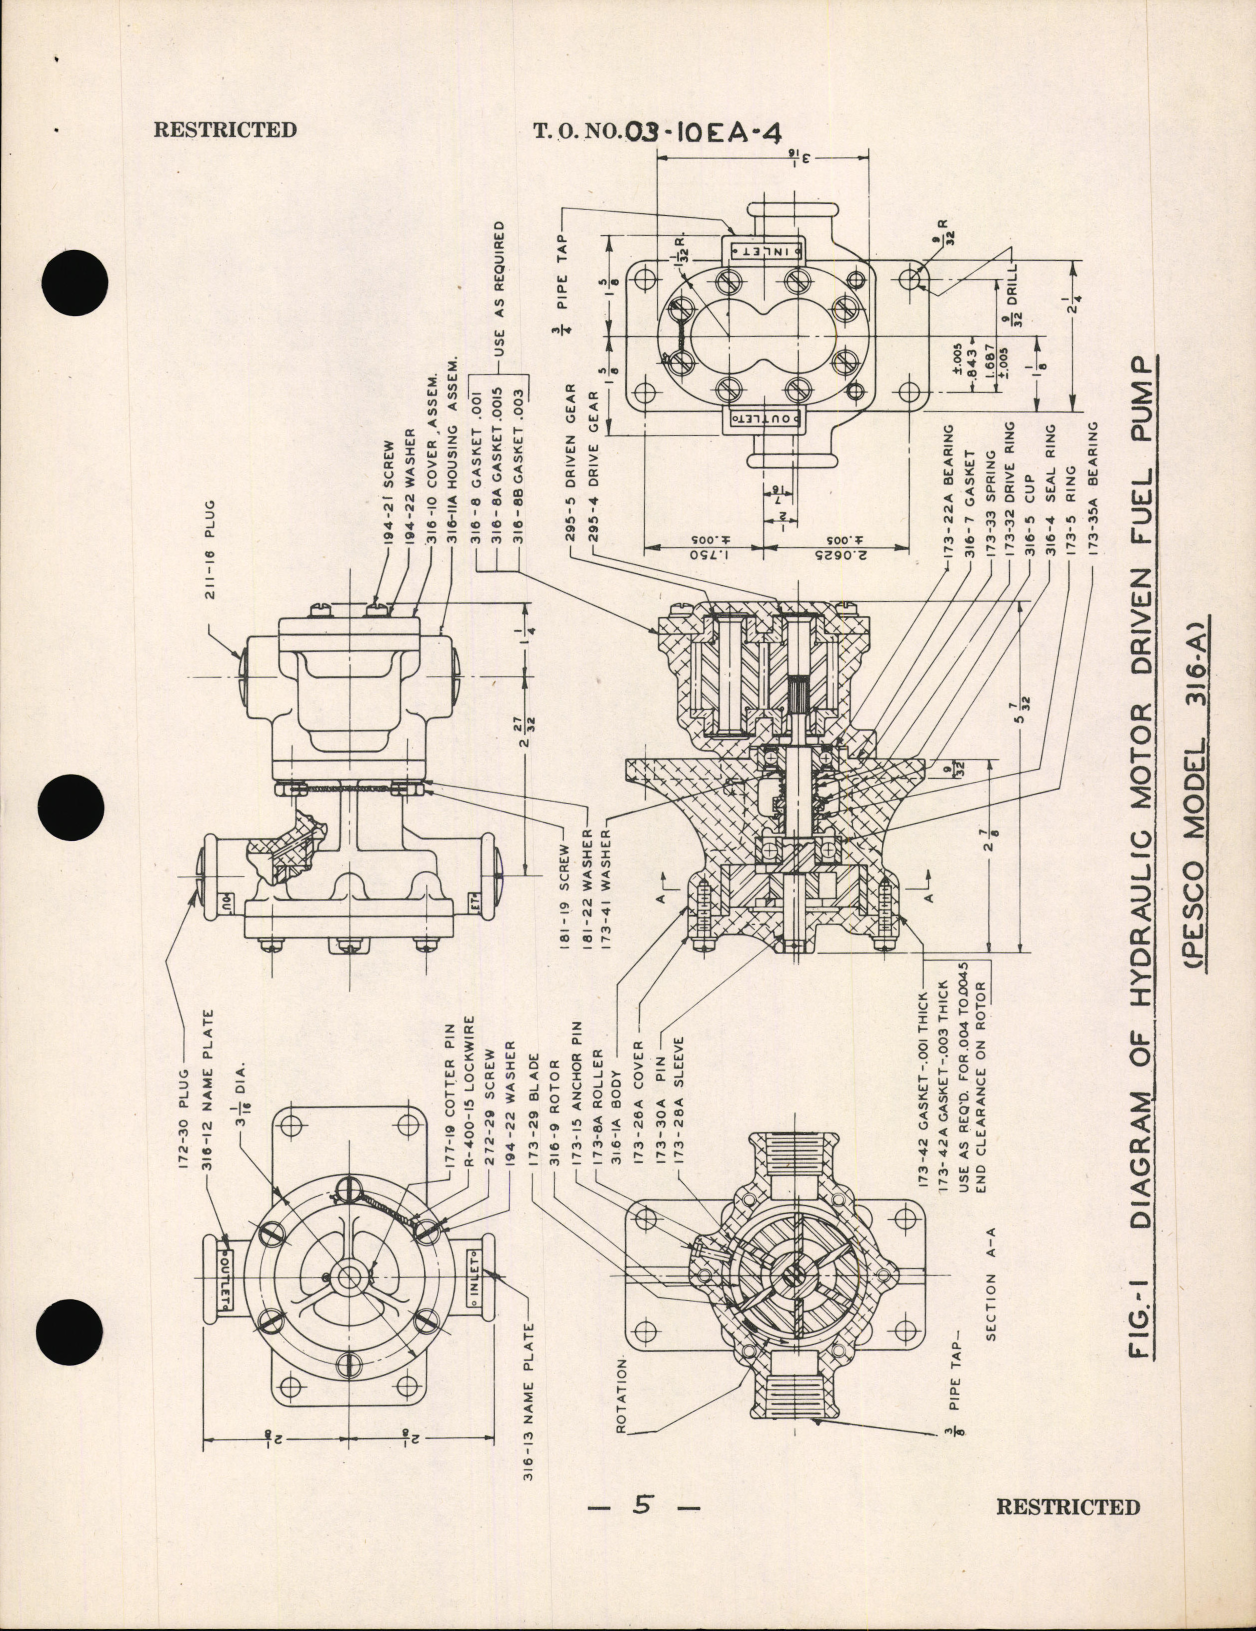 Sample page 7 from AirCorps Library document: Preliminary Handbook of Instructions with Parts Catalog for the Hydraulic Motor Driven Fuel Pump